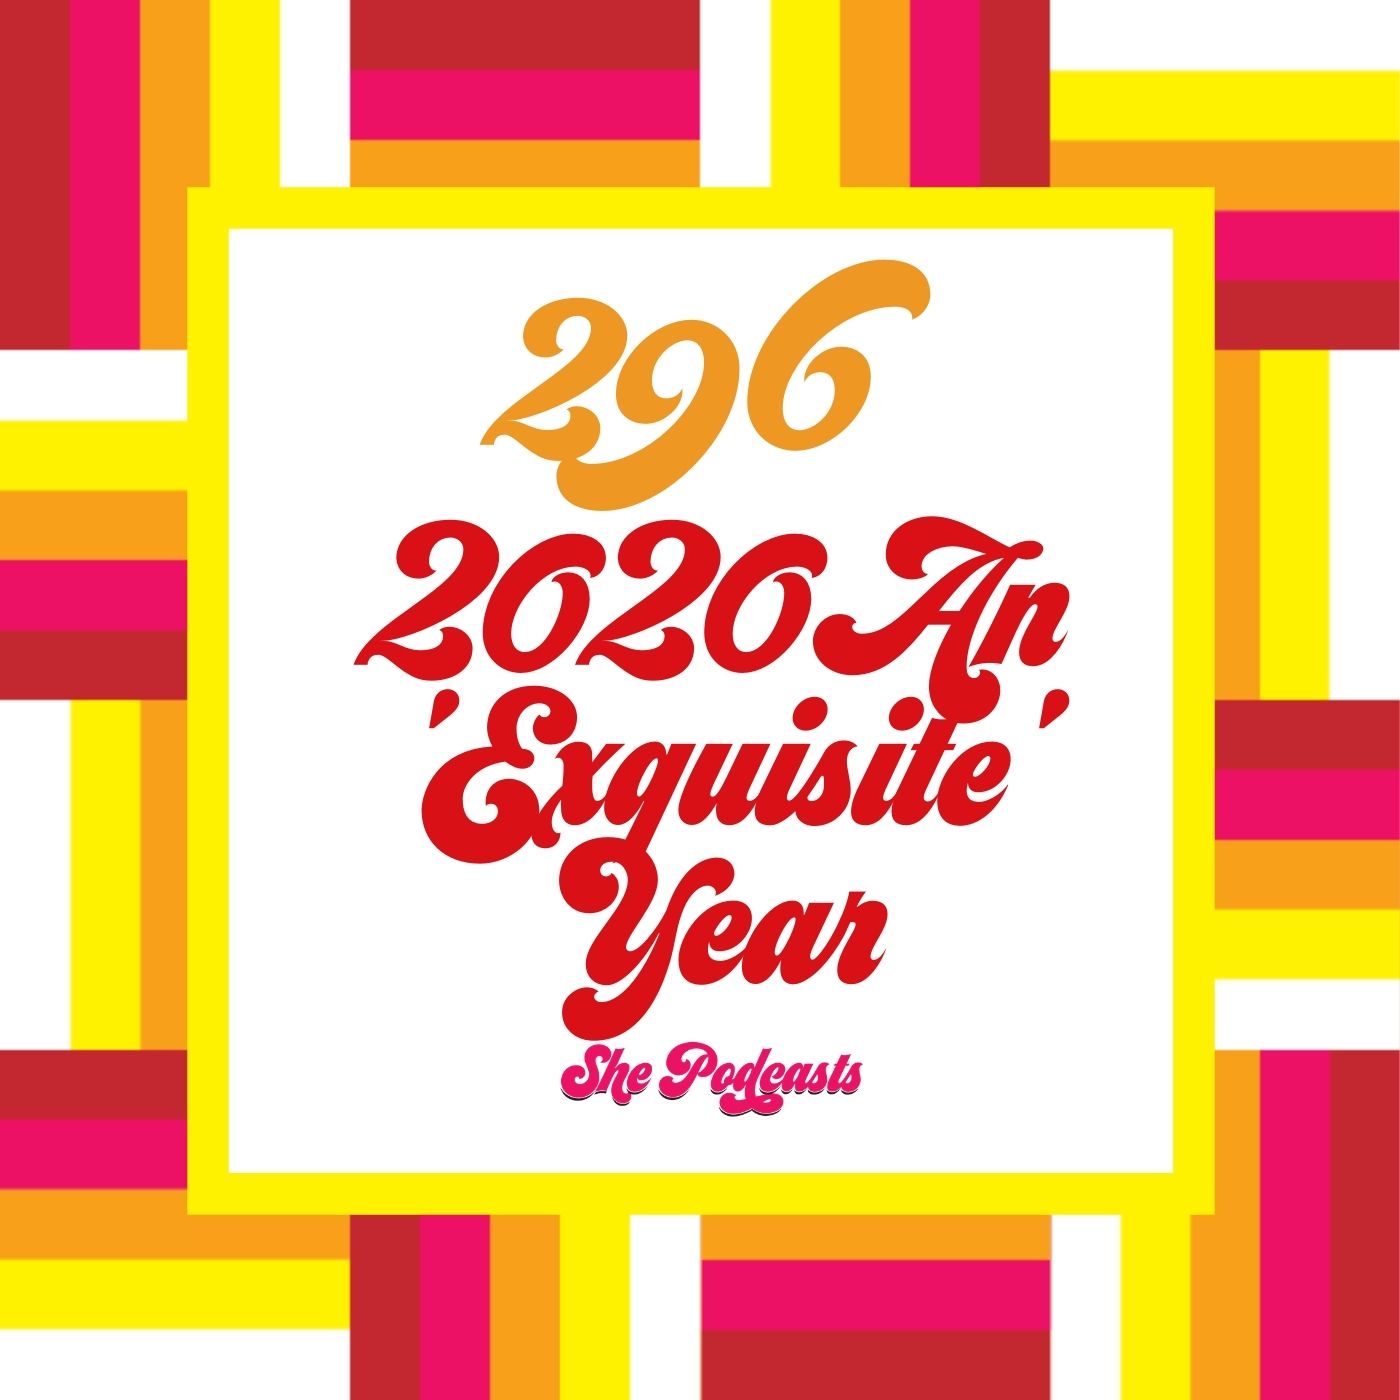 296 2020 An Exquisite Year